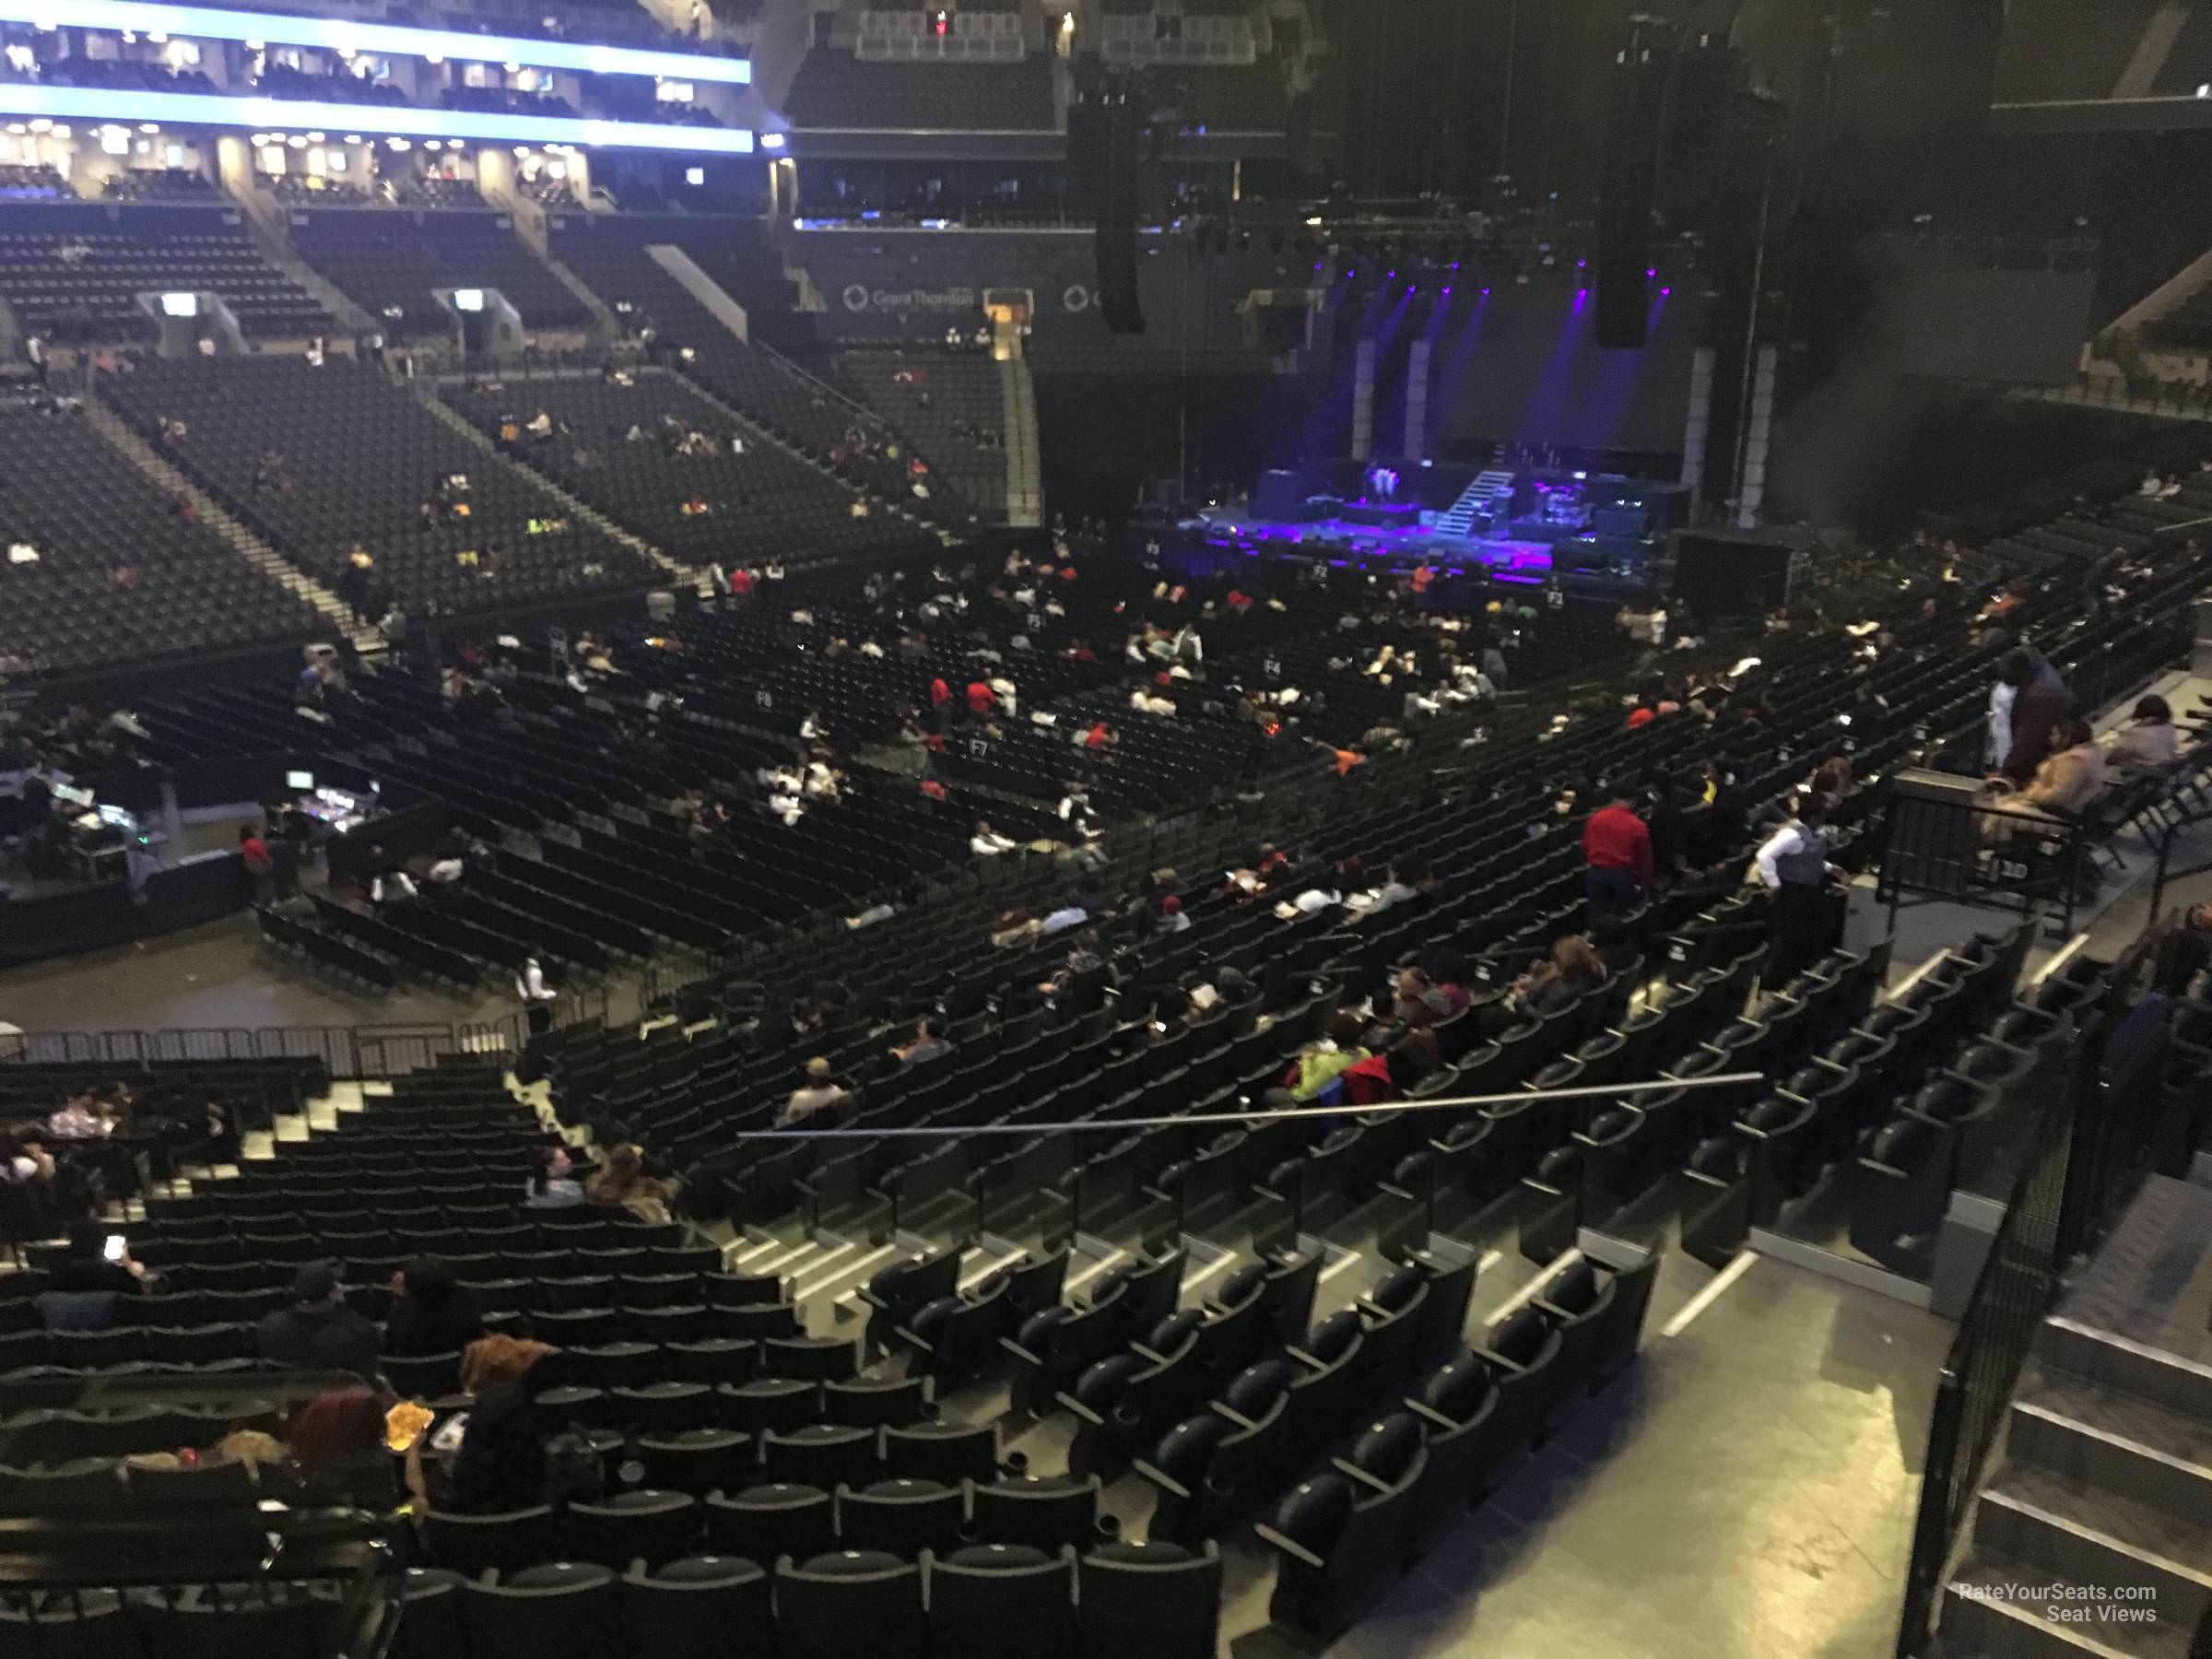 Section 111 at Barclays Center - RateYourSeats.com